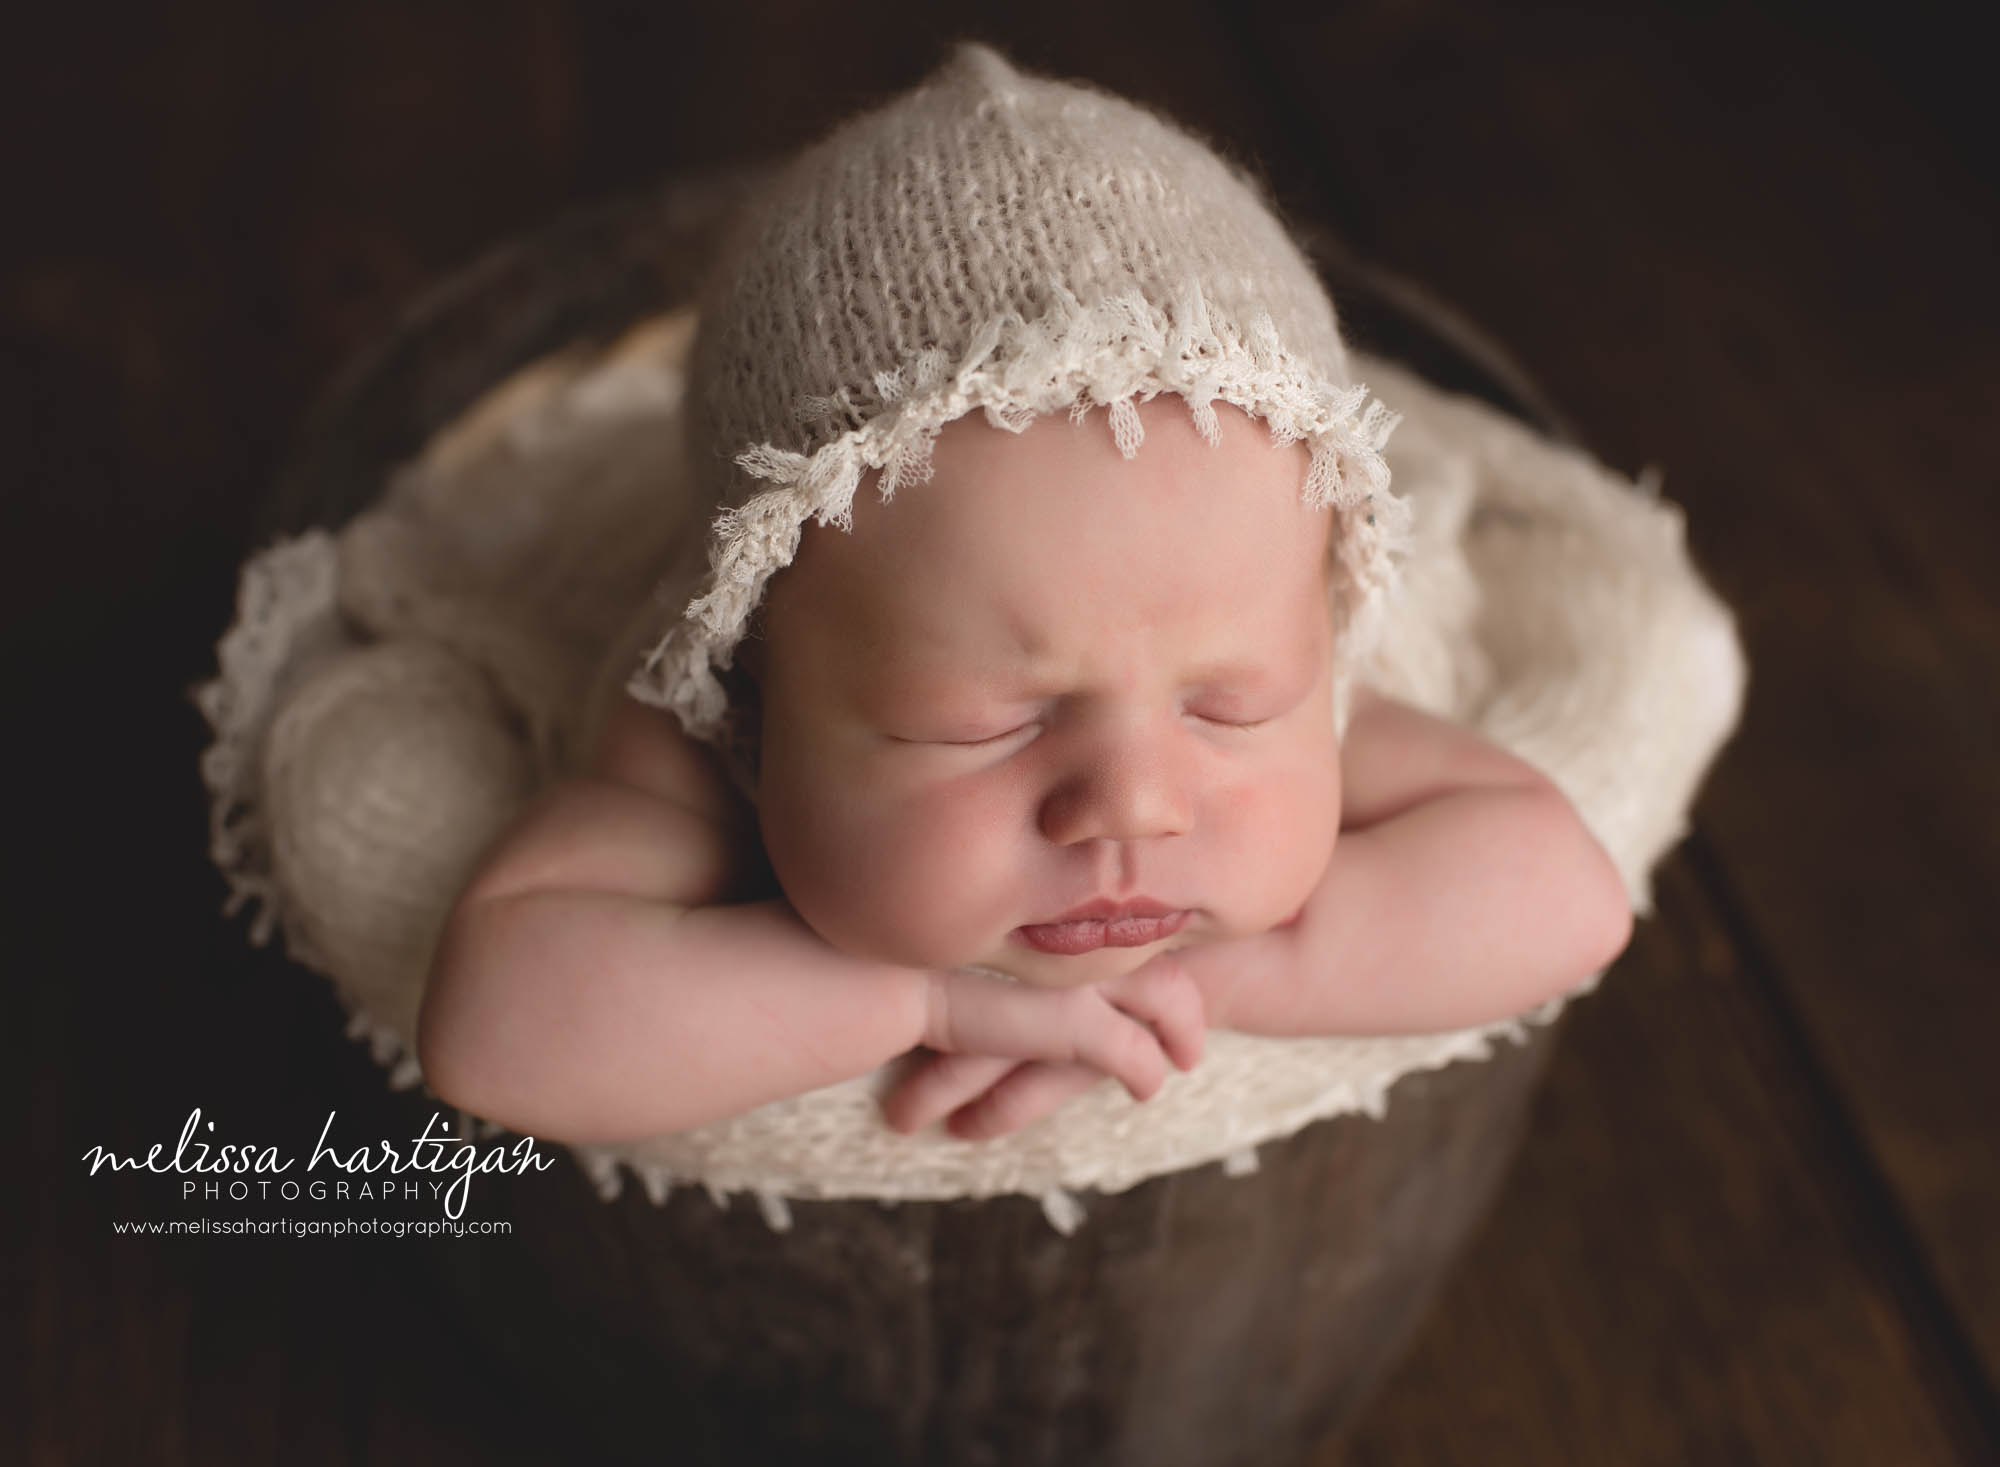 Baby girl posed in bucket wearing knitted bonnet Stafford CT baby photography